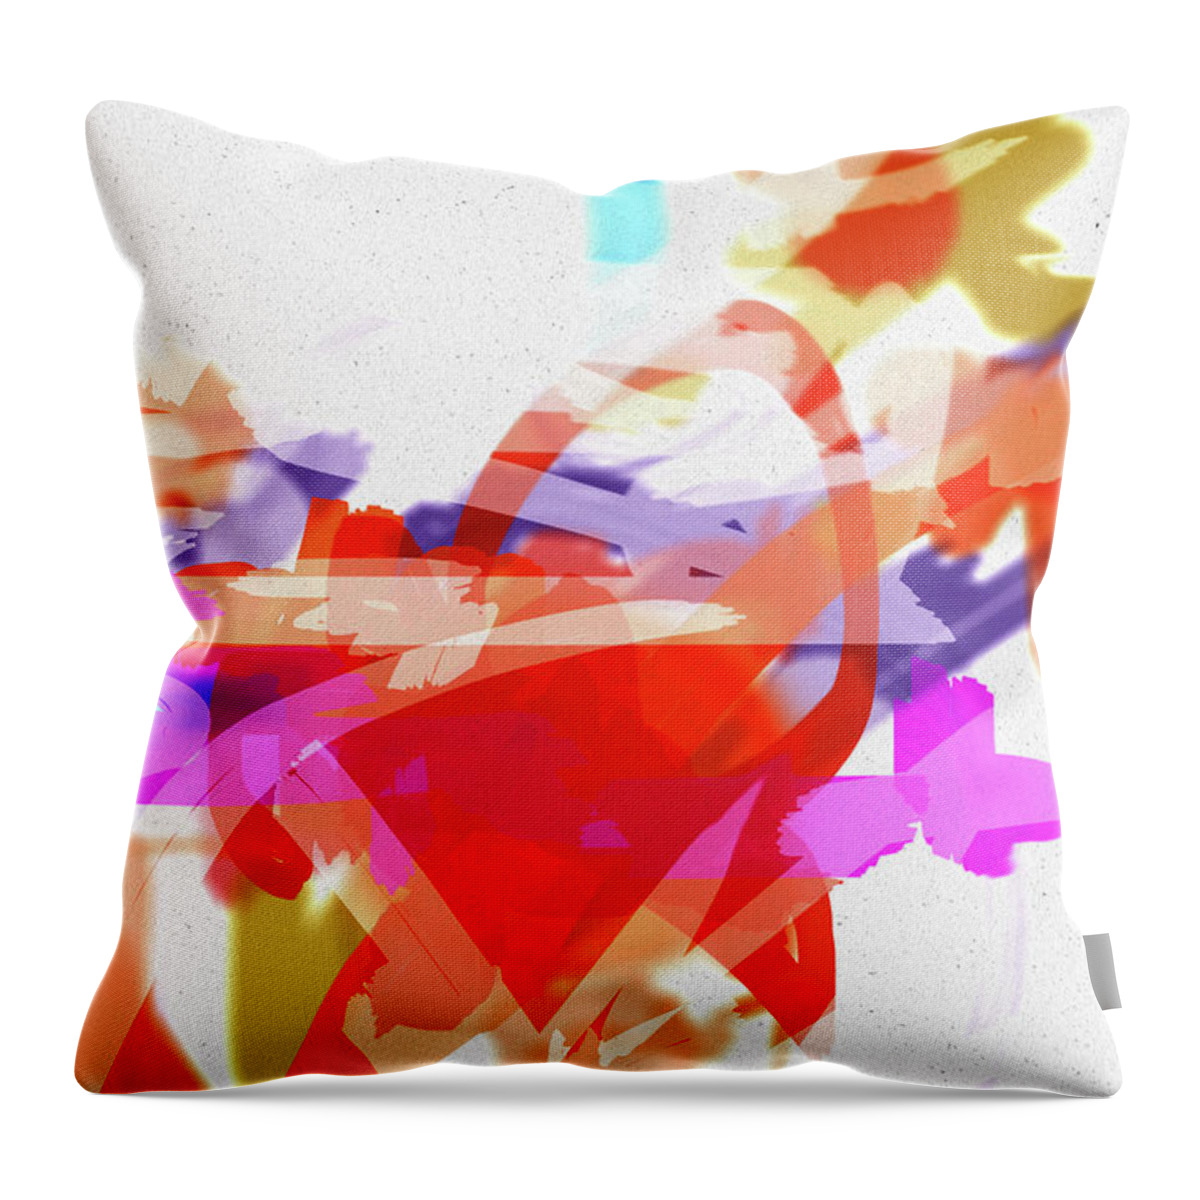 Color Forms Throw Pillow featuring the digital art Less Form by Judith Barath